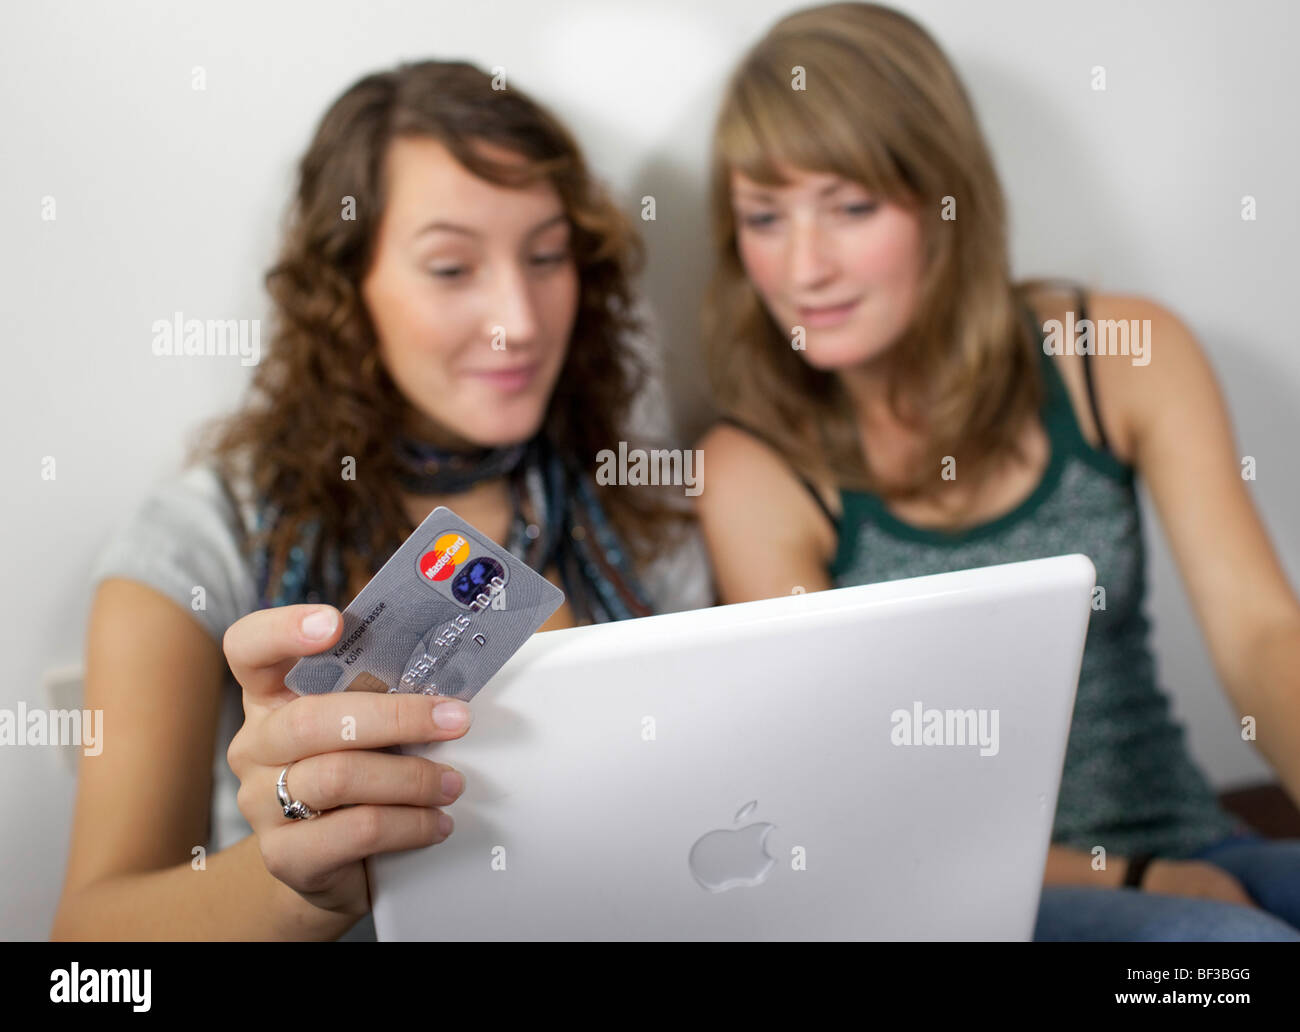 Friends shopping online together. Stock Photo